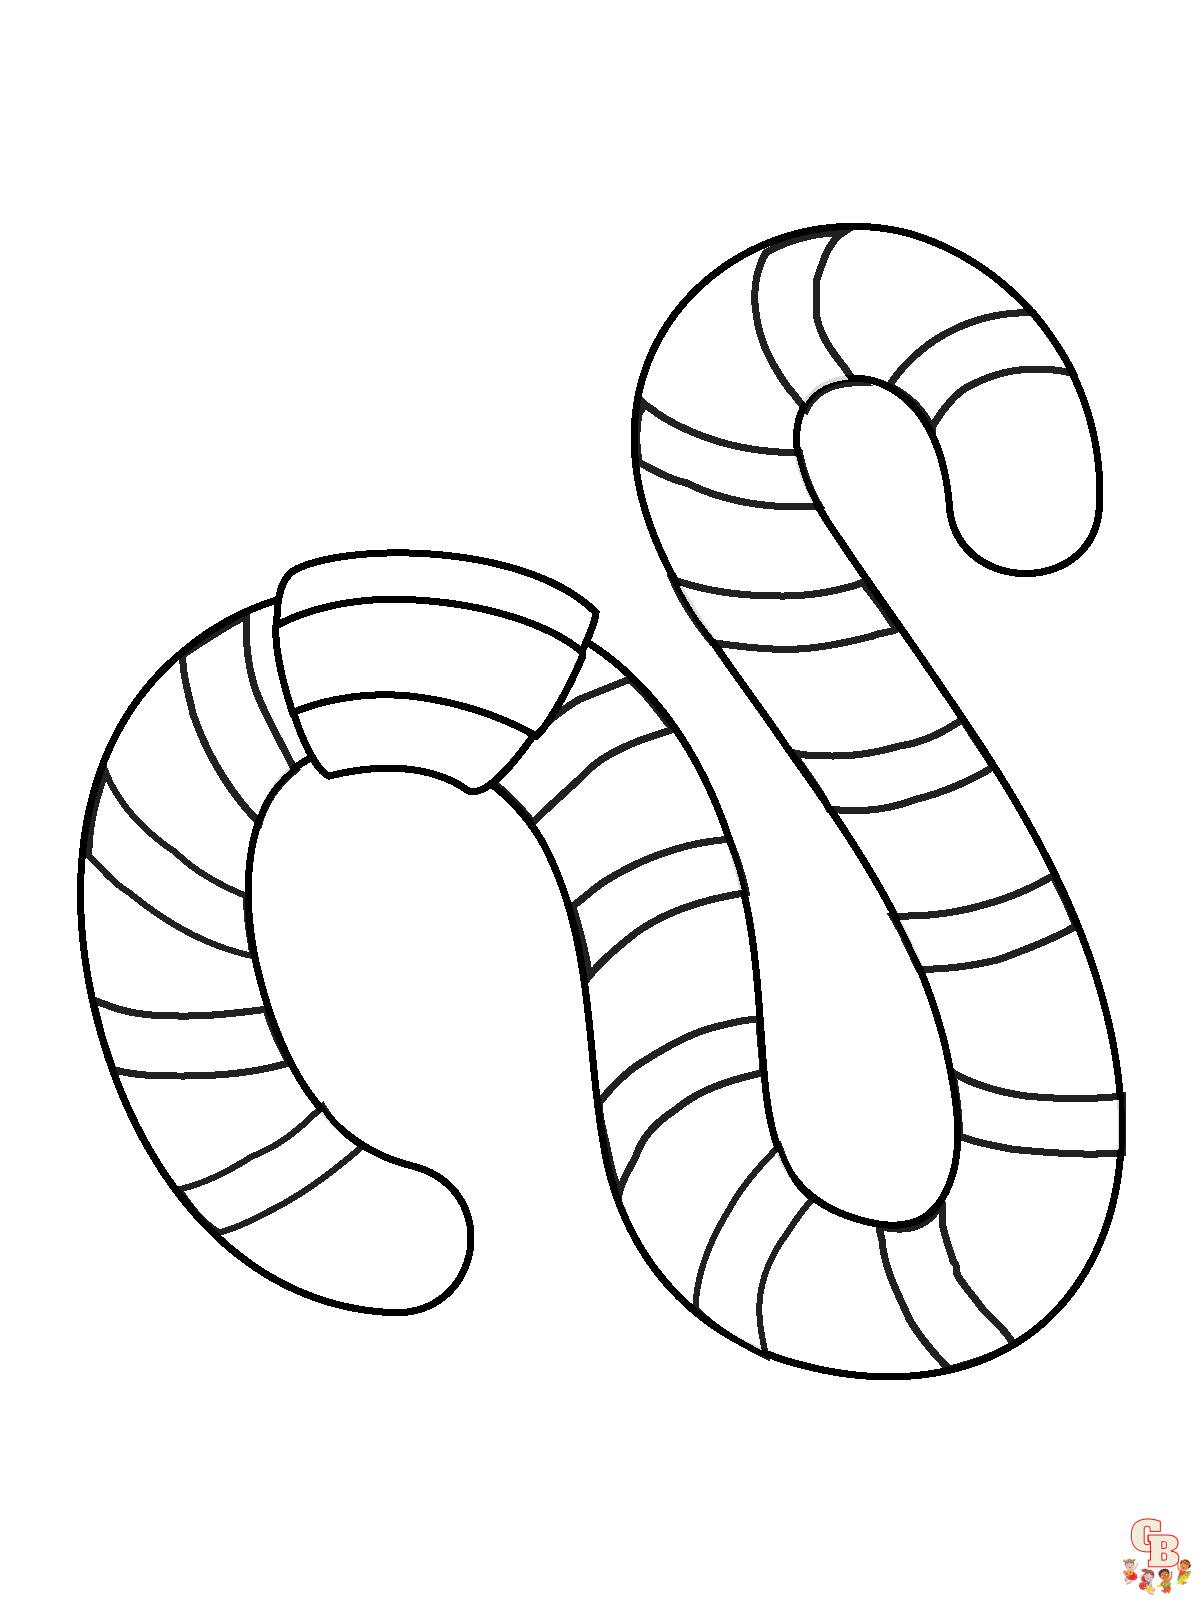 Worm Coloring Pages easy 2